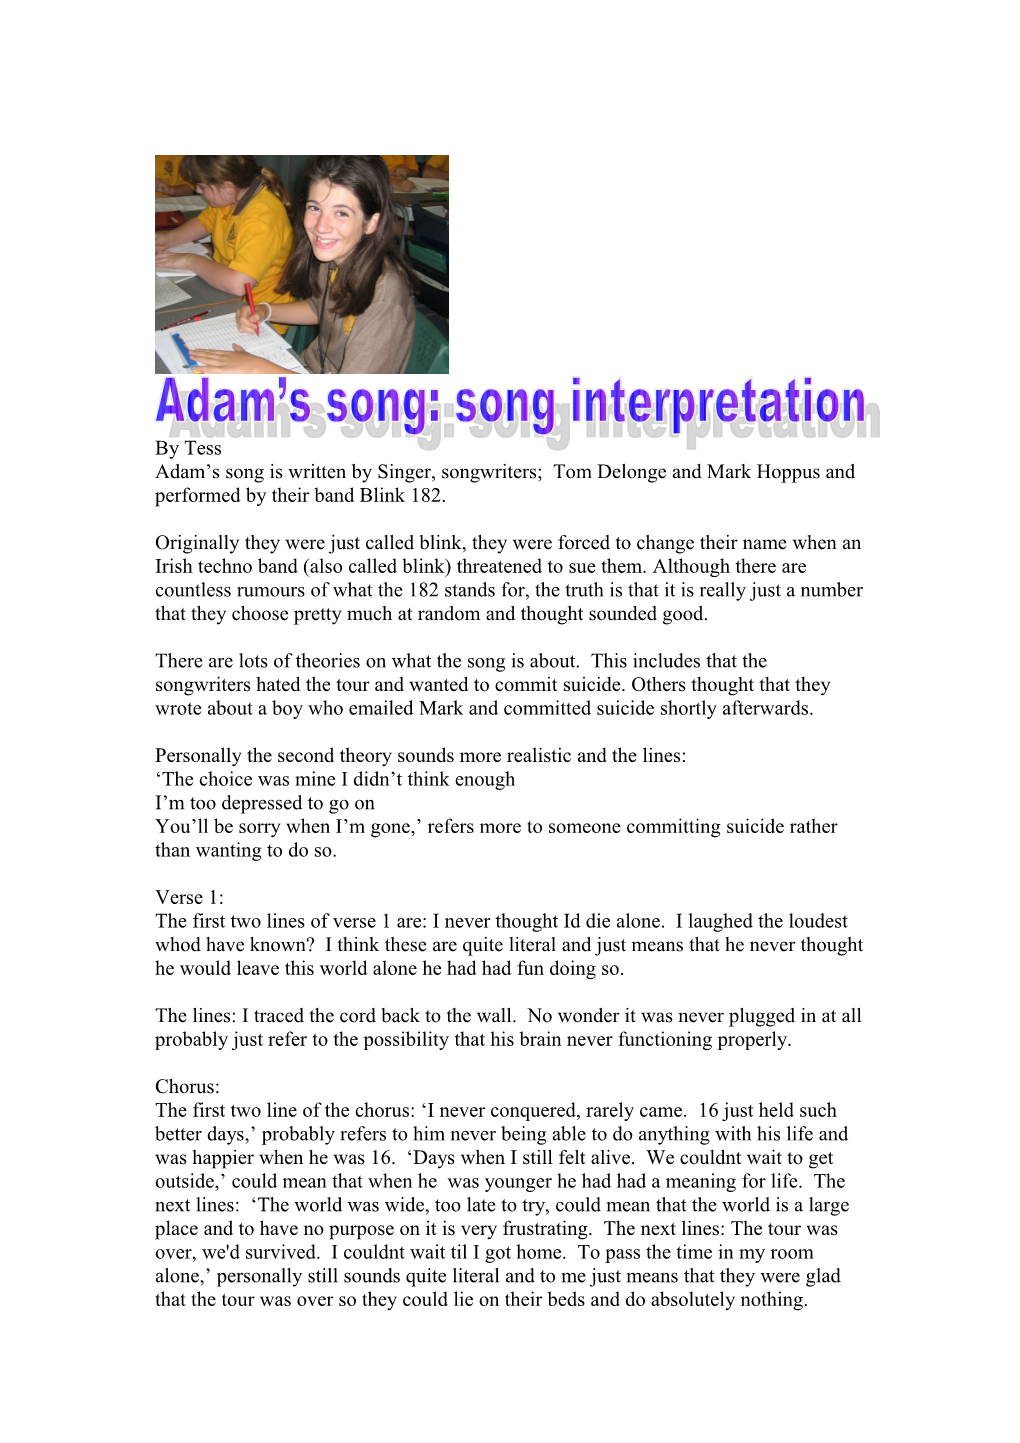 Adam S Song: Synopsis